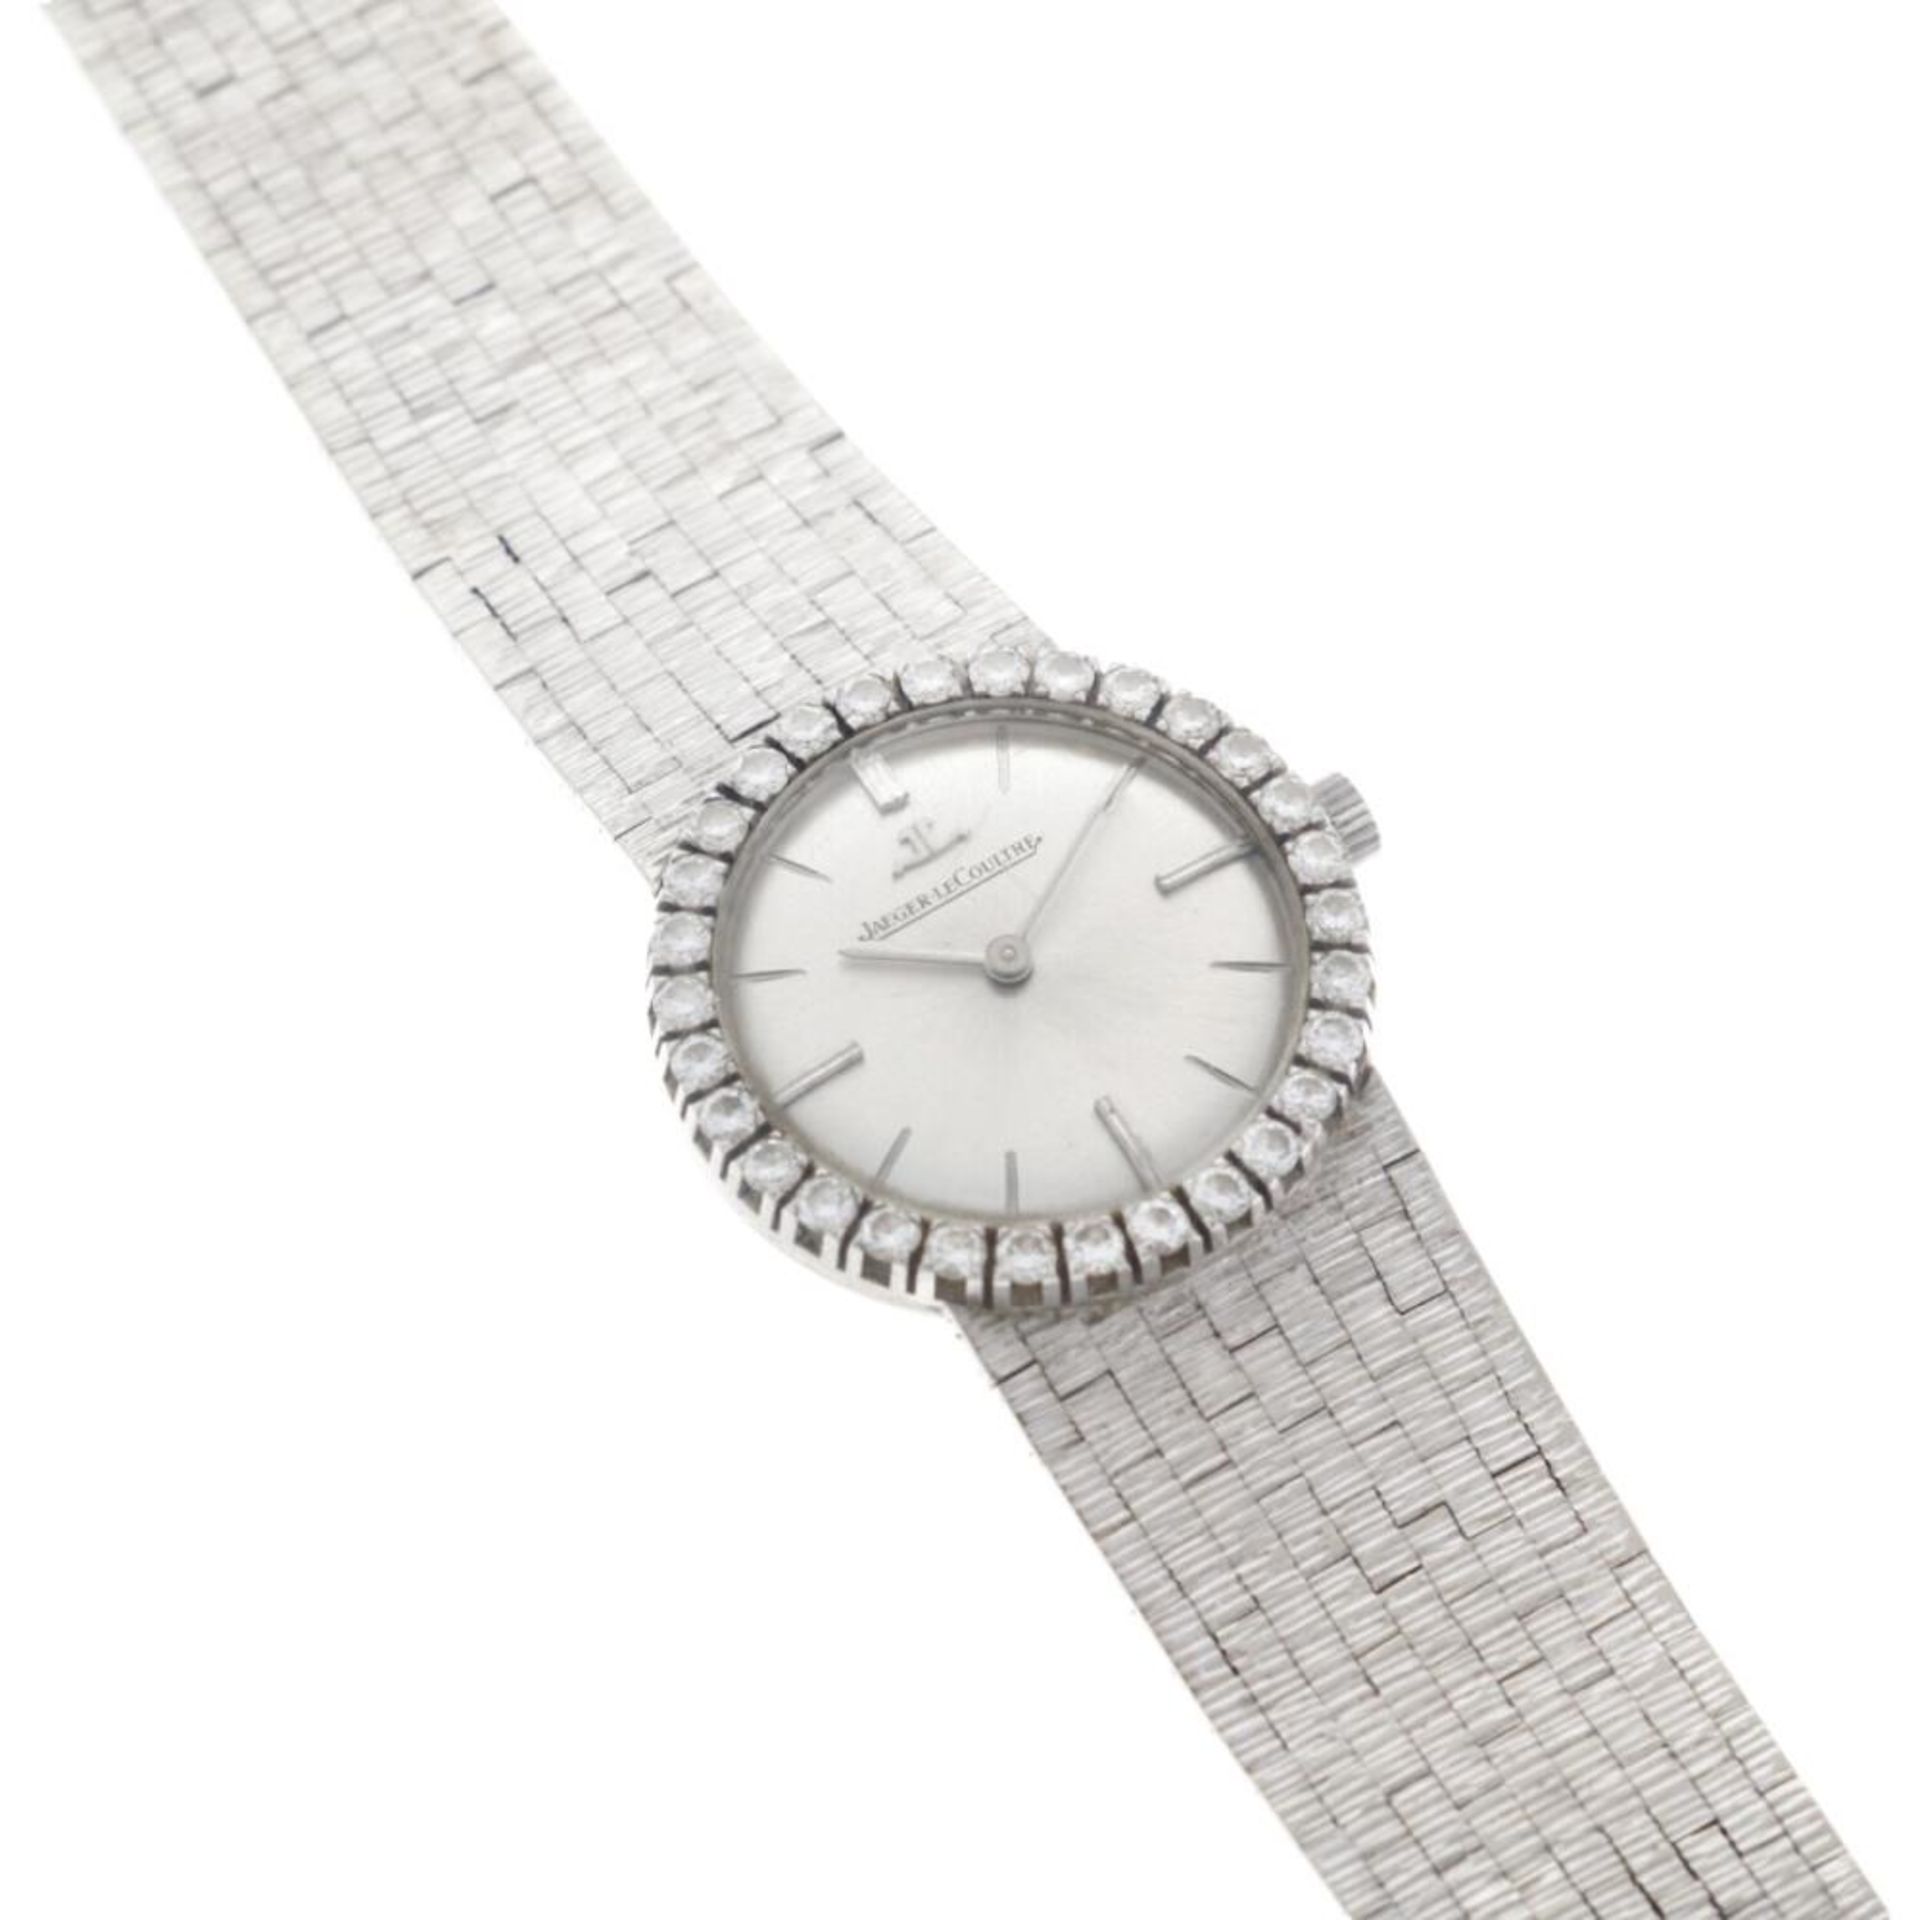 Jaeger-LeCoultre - Ladies watch - approx. 1970. - Image 6 of 7